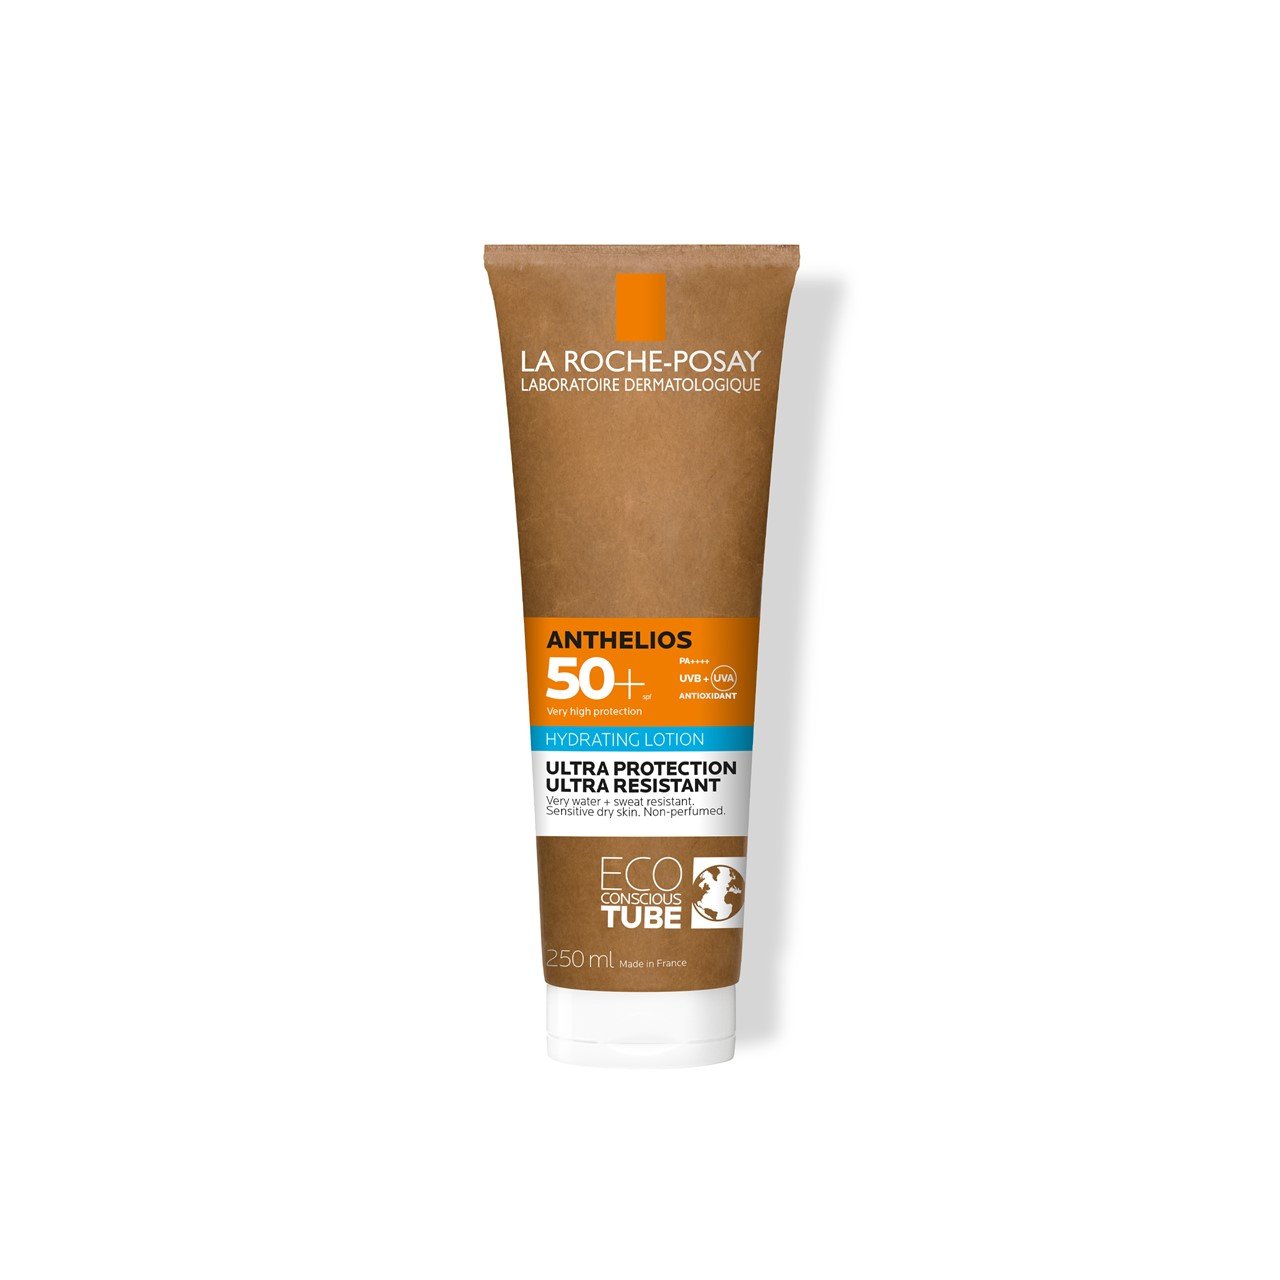 Buy La Roche-Posay Anthelios Hydrating Lotion Eco-Tube SPF50+ · Japan (JPY¥)